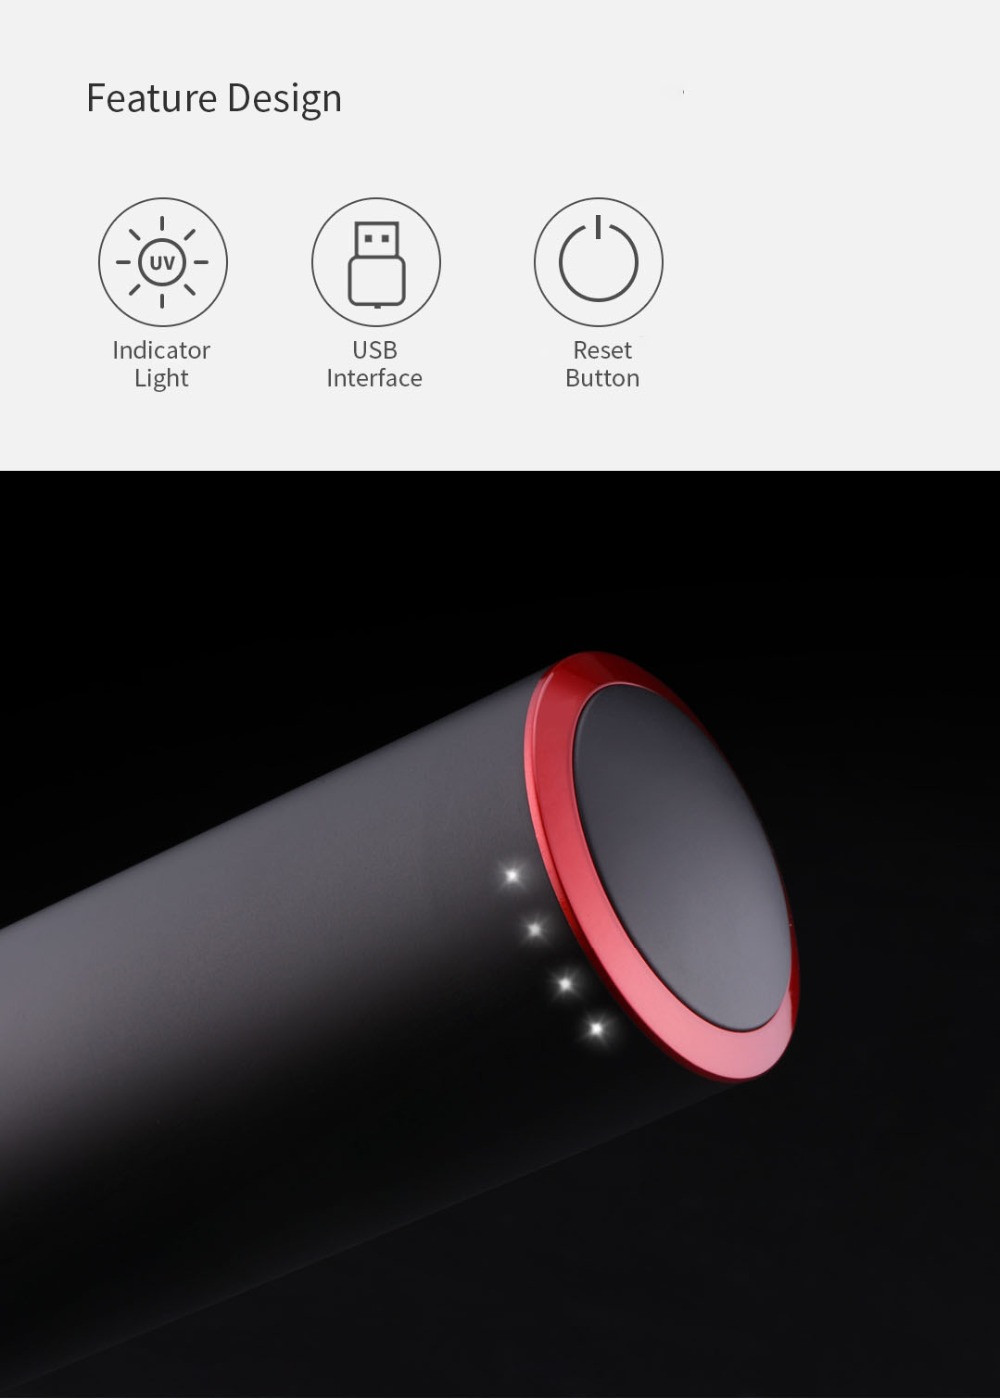 Circle-Joy-Smart-Automatic-Electric-Bottle-Opener-USB-Charging-Home-Kitchen-Bar-W-ine-Opening-Tool-1547336